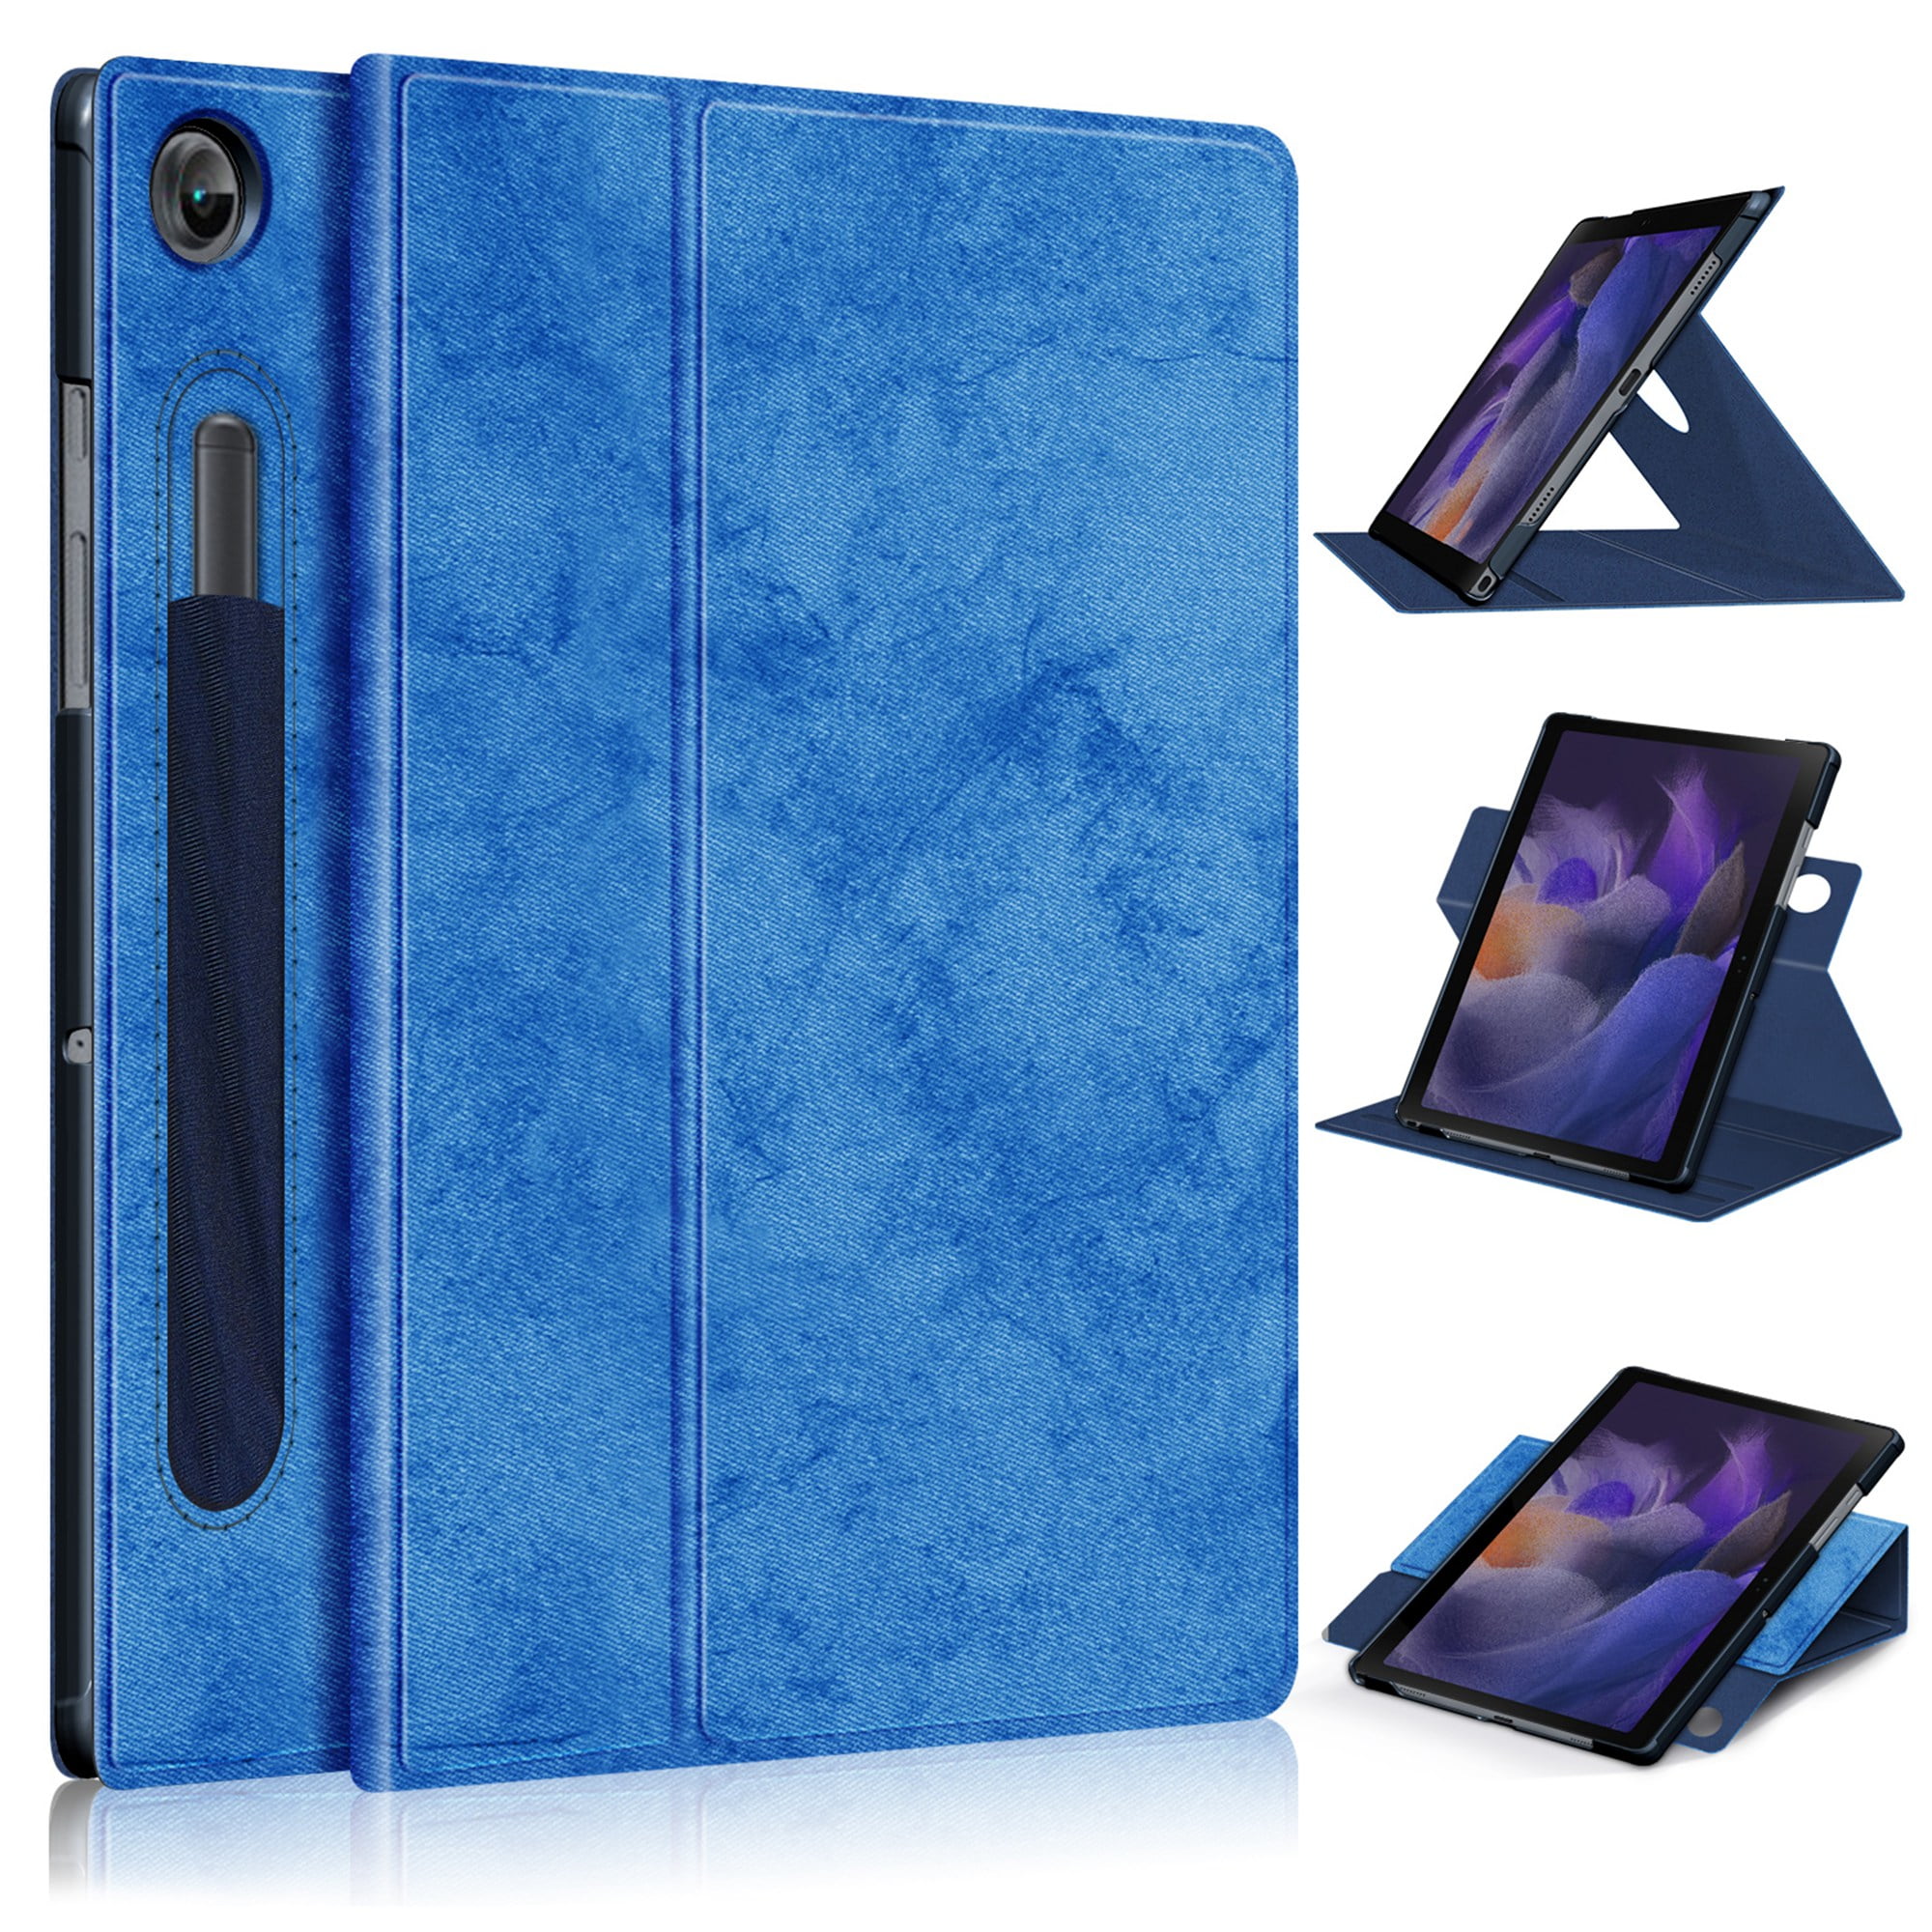 Galaxy Tab A8 (10.5") Case (SM-X200) - TECH CIRCLE Rotating Fold Stand Folio Case Protective PU Leather Flip with [Pencil Holder] for Samsung Galaxy Tab A8 10.5-Inch Android Tablet,Darkblue -